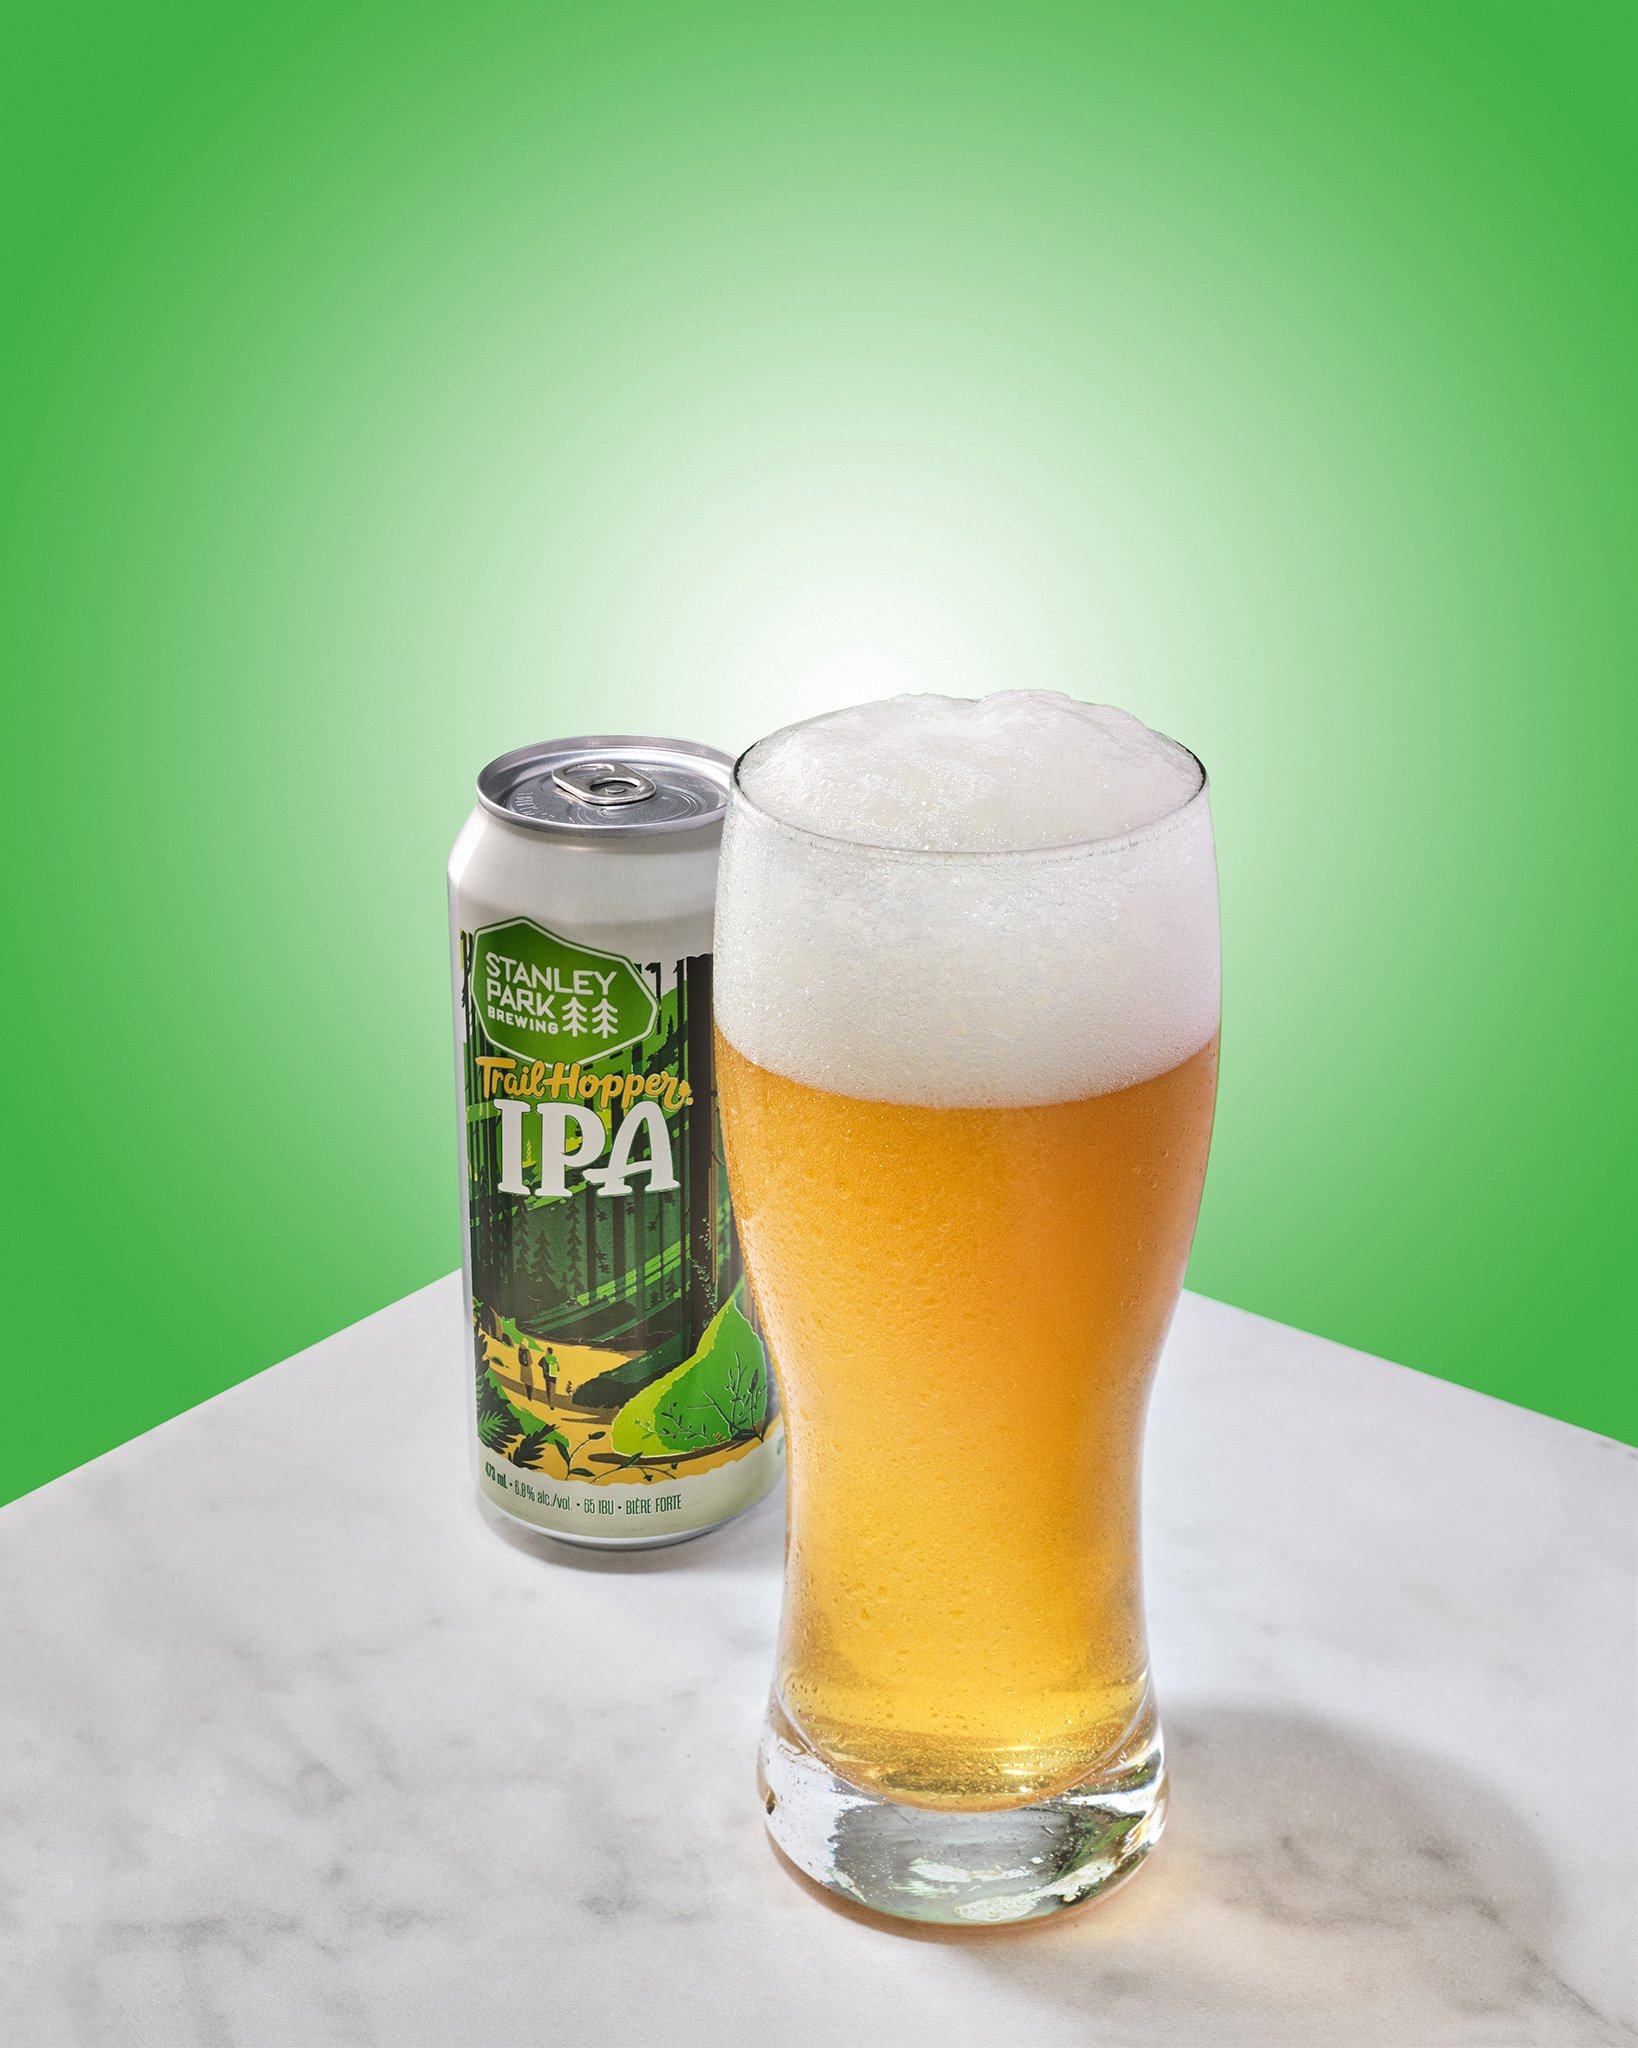 Stanley Park Trail Hopper IPA Commercial Photography St Padraig St Pattys day